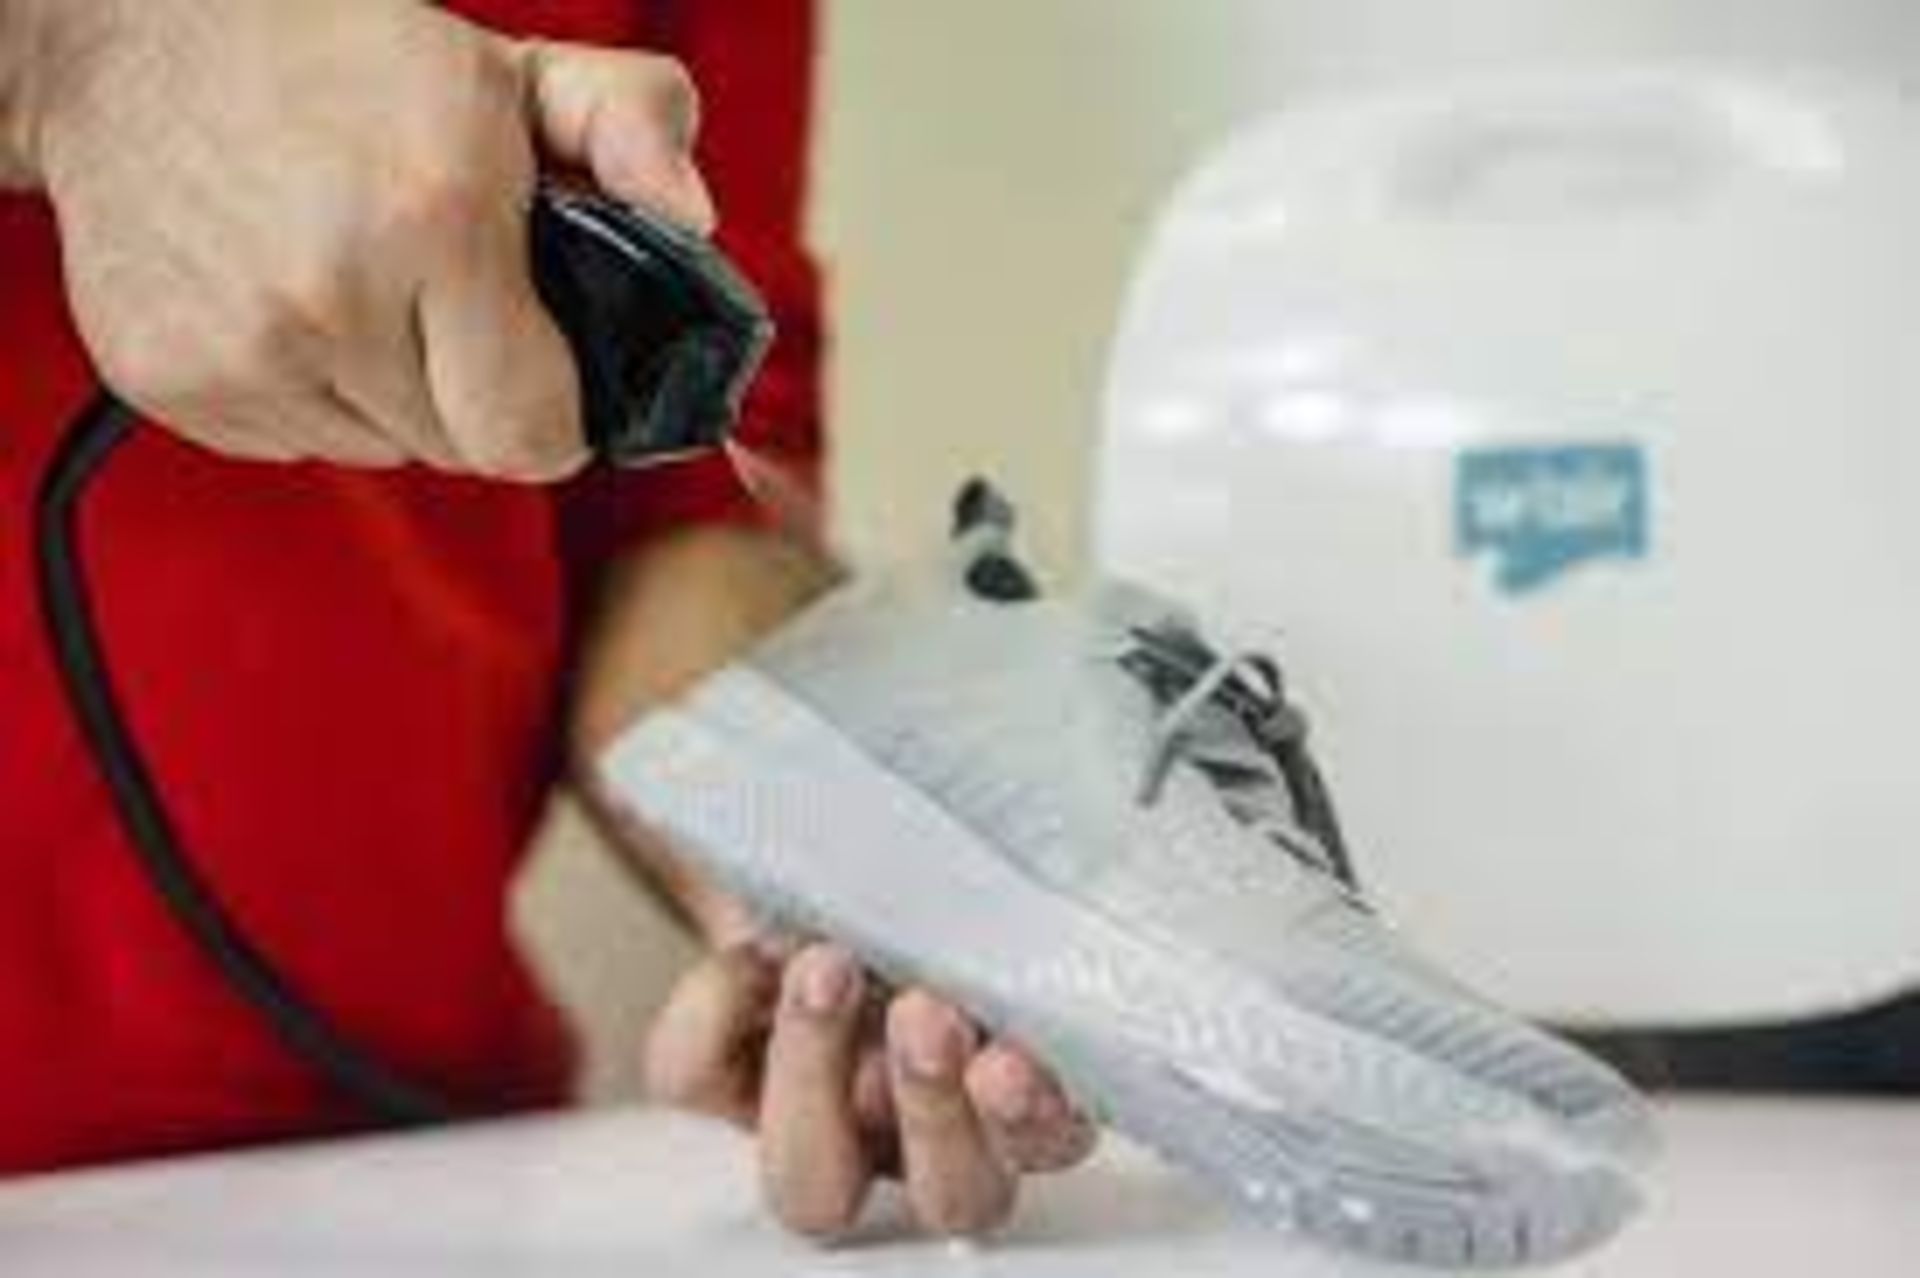 BRAND NEW W'AIR SNEAKER CLEANING SYSTEMS RRP £299, The w'air uses hydrodynamic technology - Bild 3 aus 6